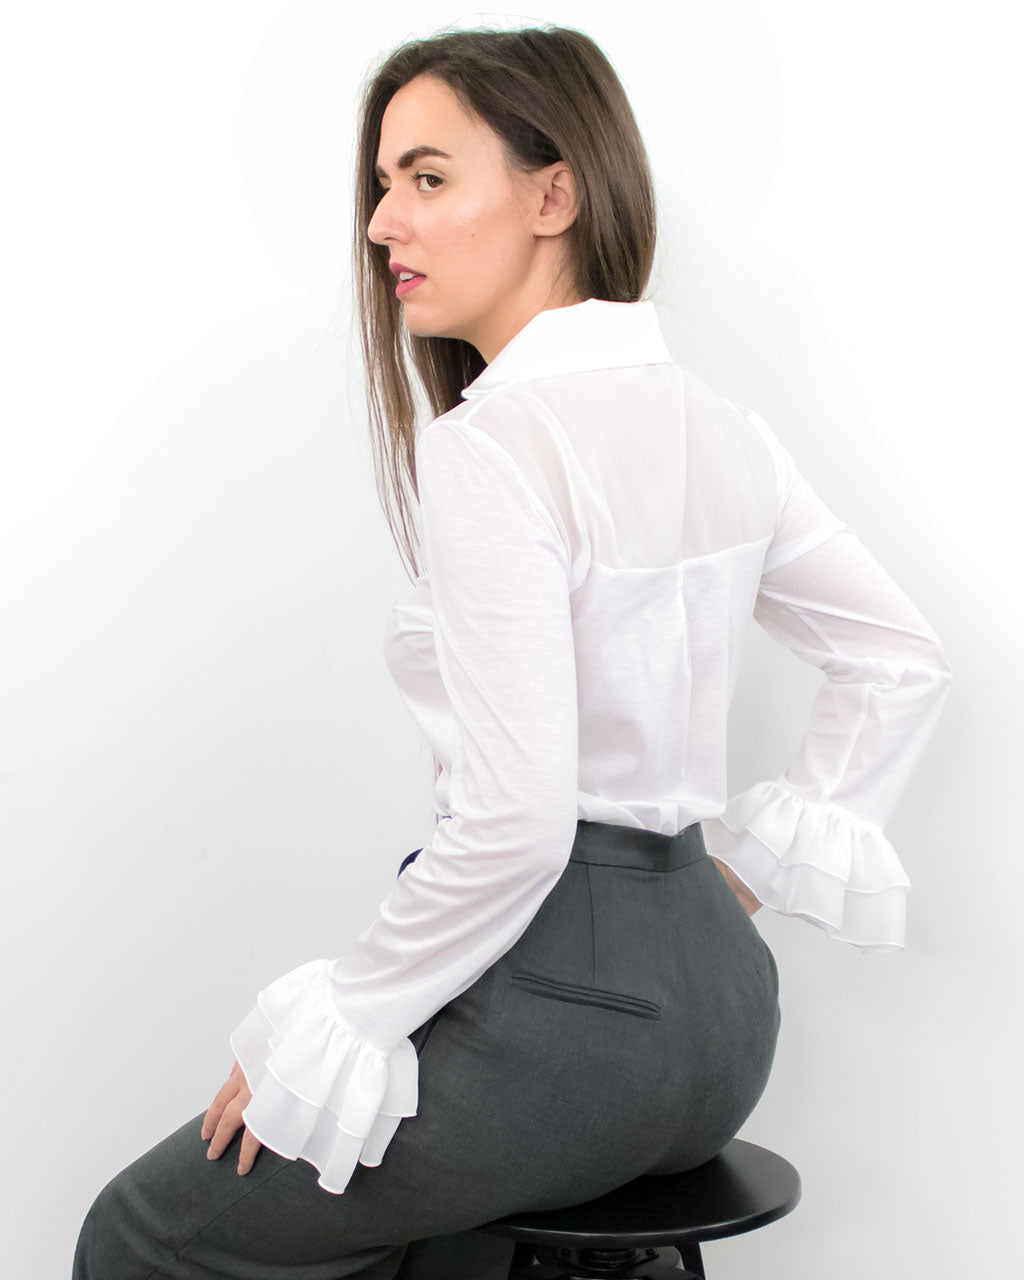 Classic elegant designer formal smart office work organic cotton shirt blouse with ruffle long sleeves ethically made in UK